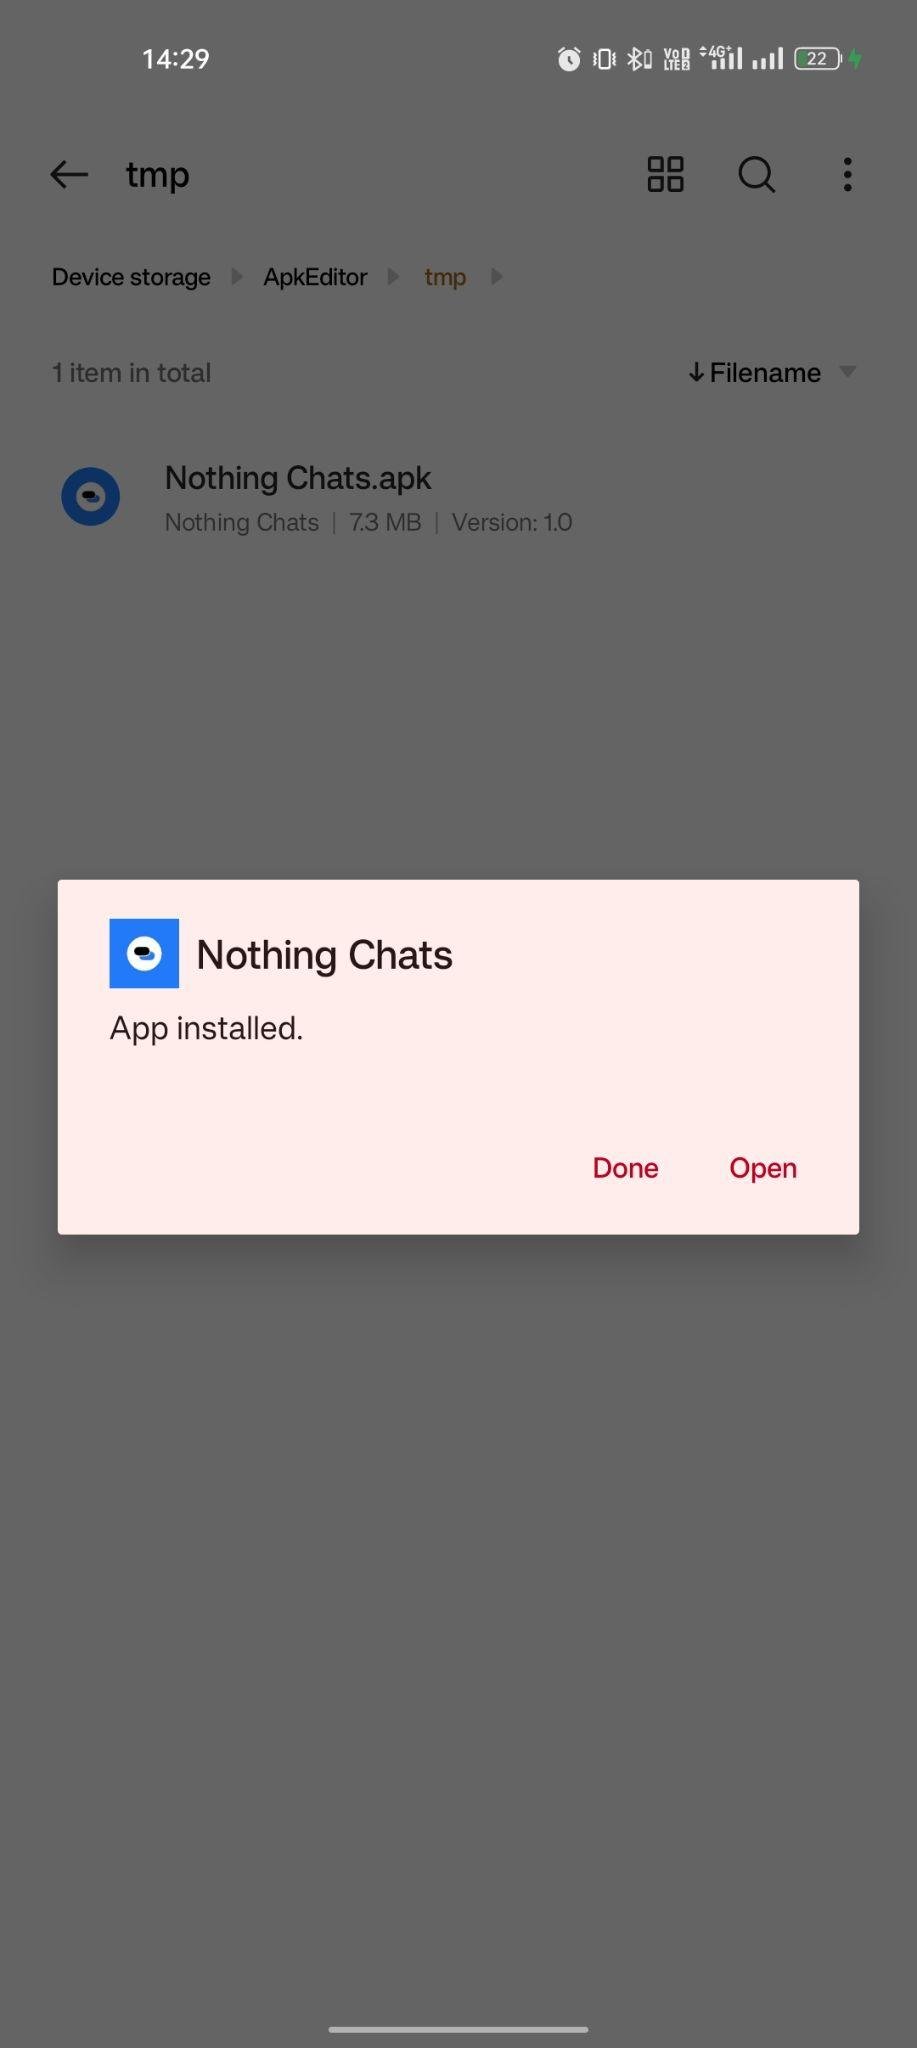 Nothing Chats apk installed